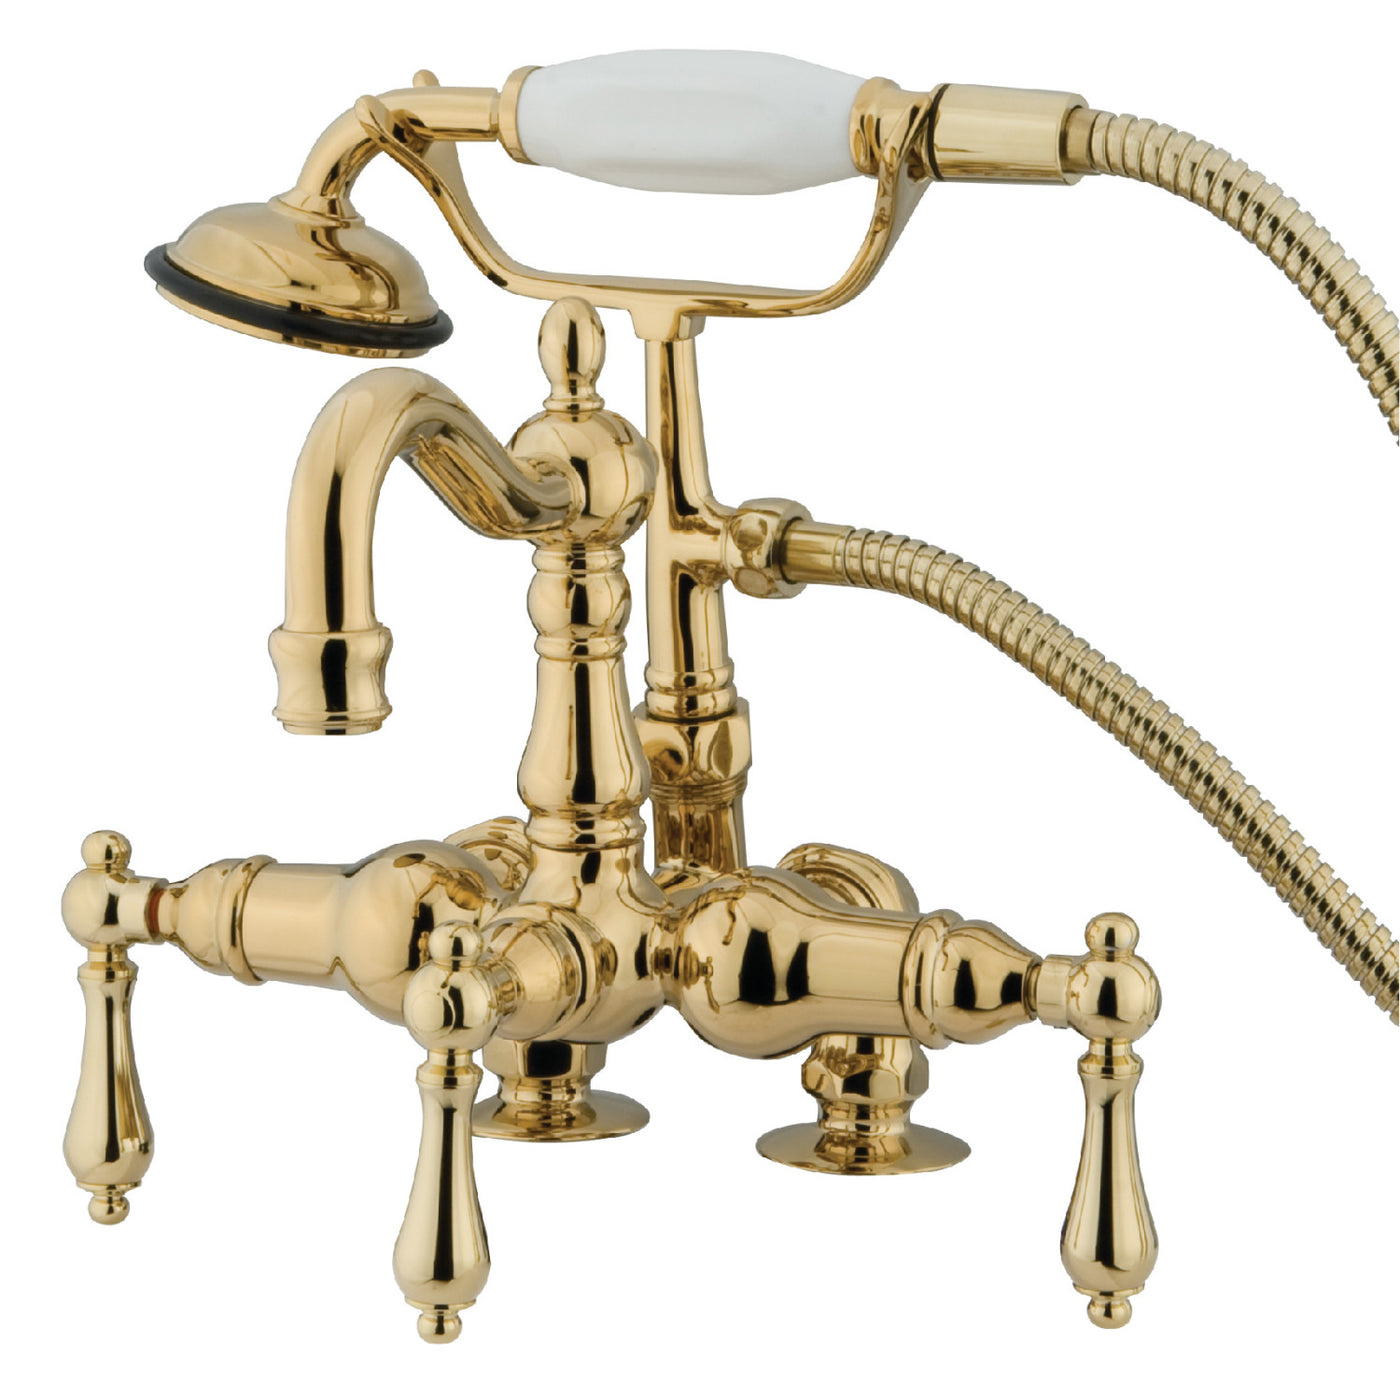 Elements of Design DT10132AL 3-3/8-Inch Deck Mount Clawfoot Tub Faucet with Hand Shower, Polished Brass